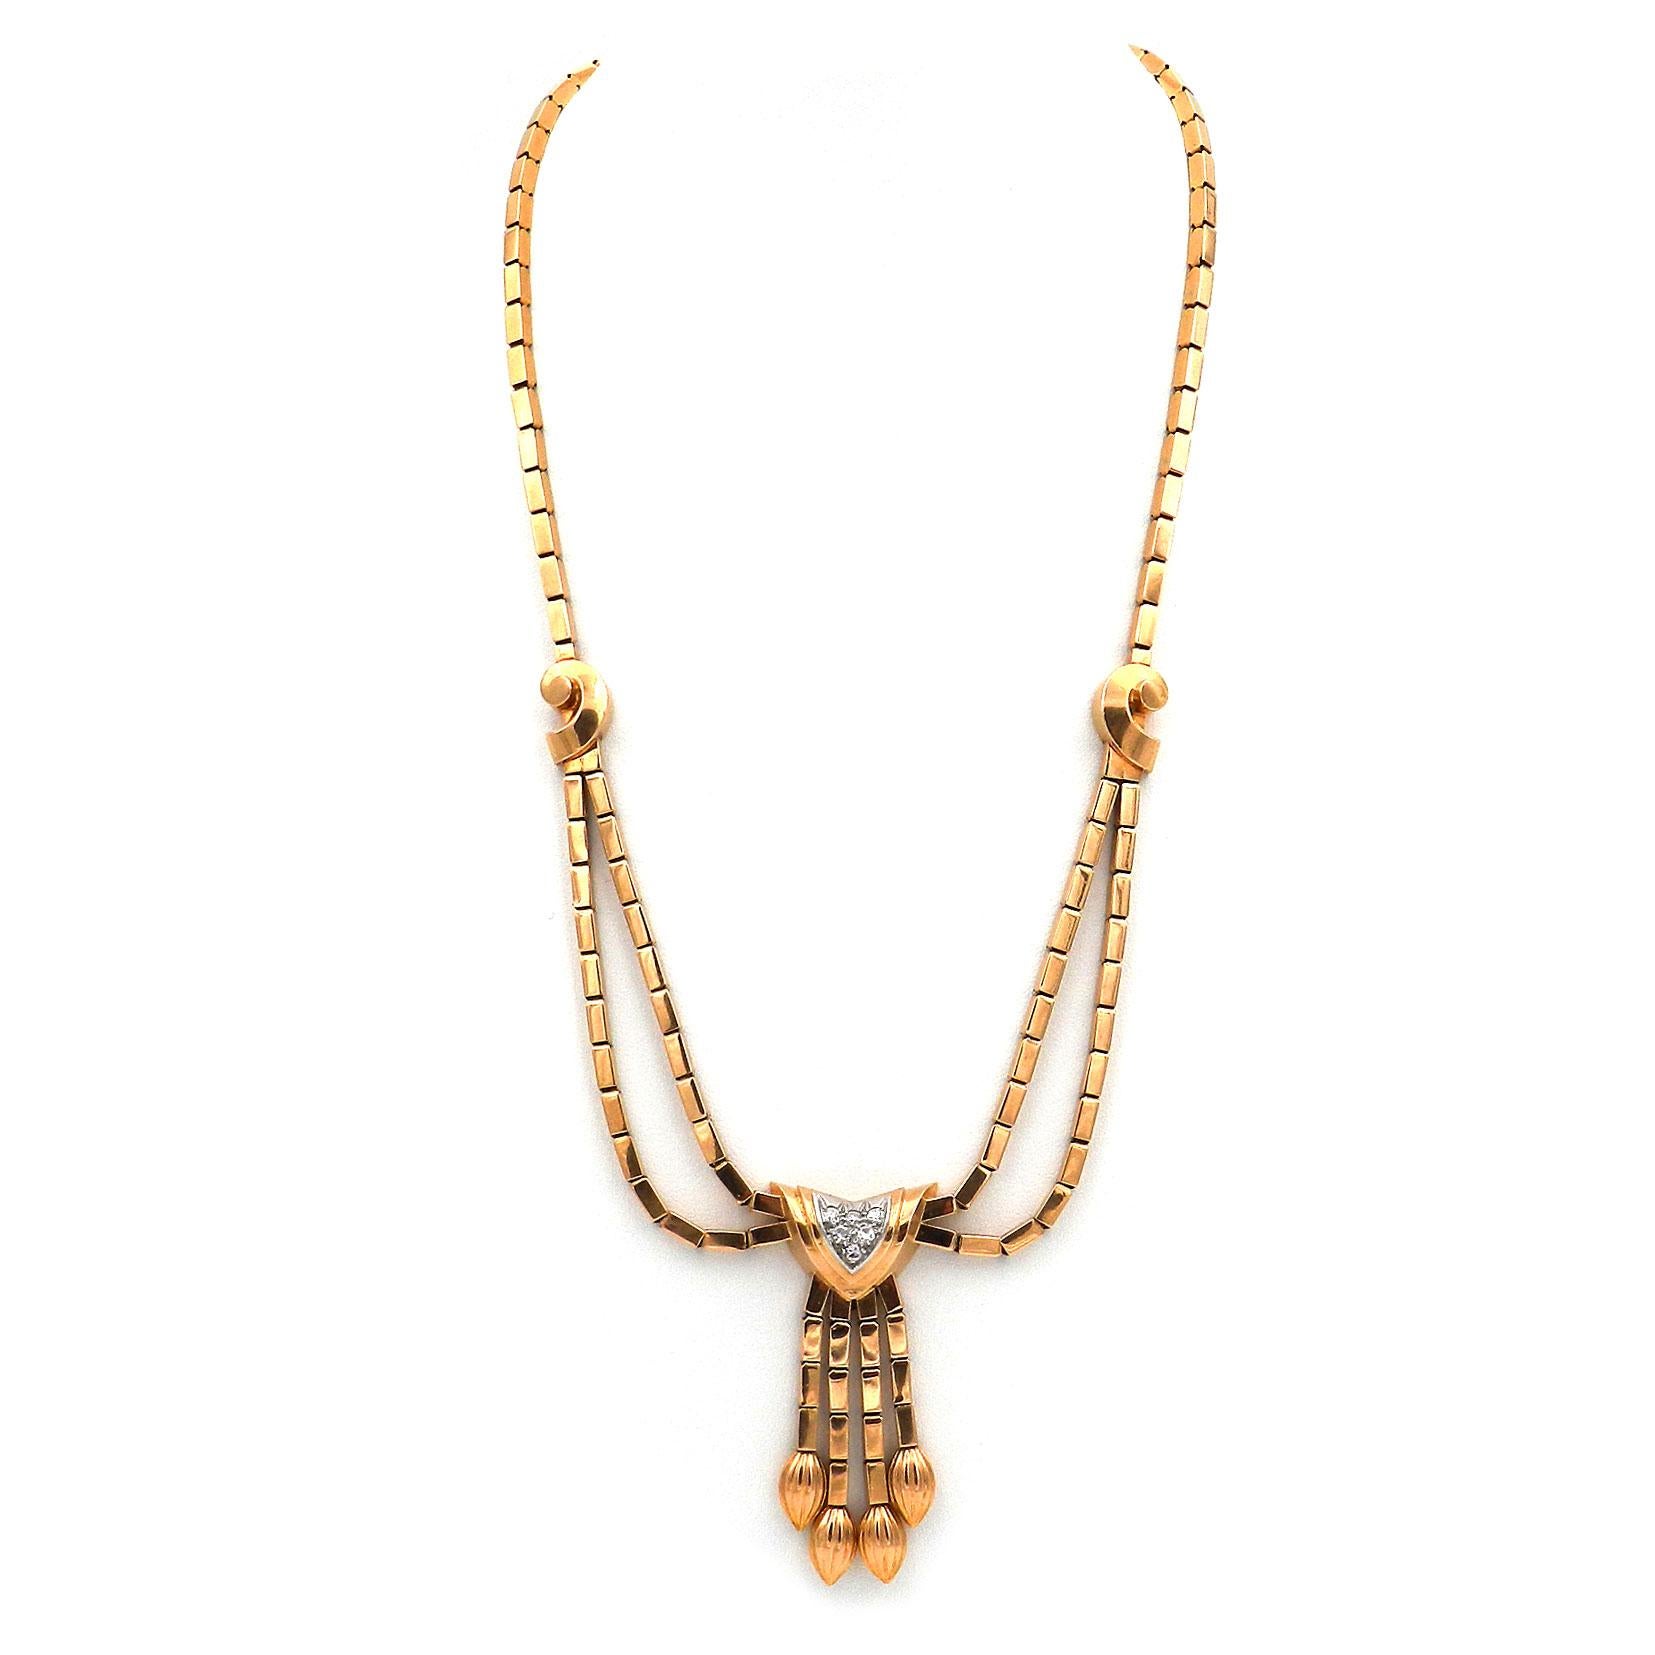 Retro Diamond 18K Gold and Platinum Necklace, Paris circa 1945

Elegant, wonderfully flowing Retro necklace made of rod-shaped links, the face side with snail-shaped applications, designed in two rows and ending in a diamond-set fringe pendant.